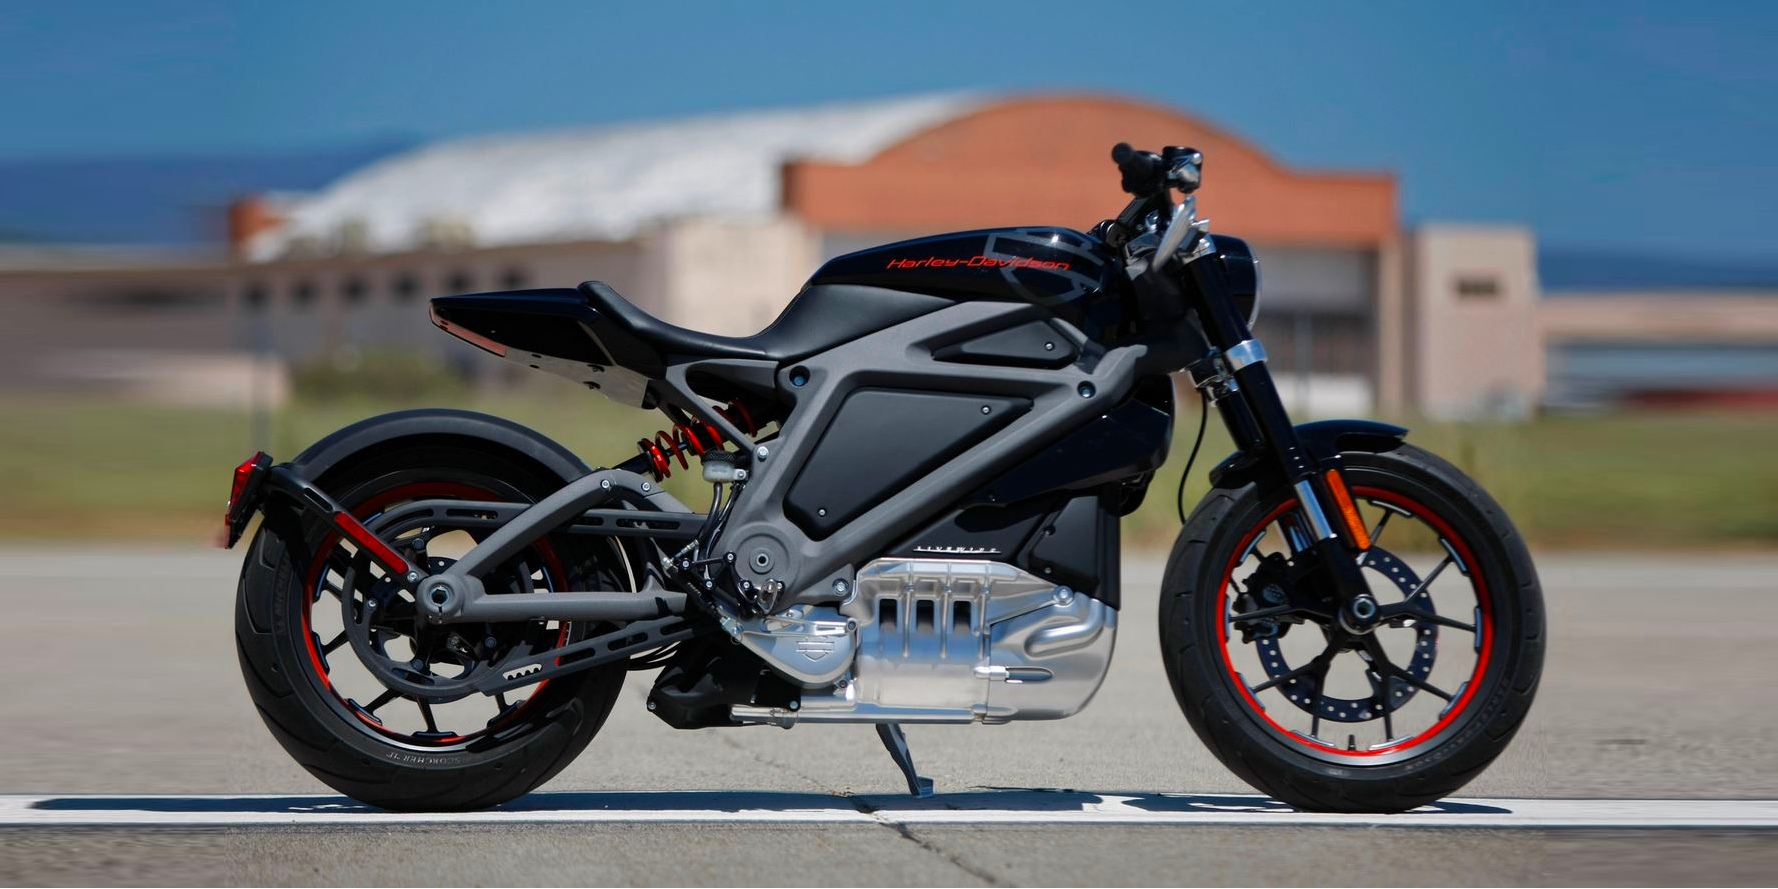 Harley Davidson's upcoming electric motorcycles seek to expand to ...